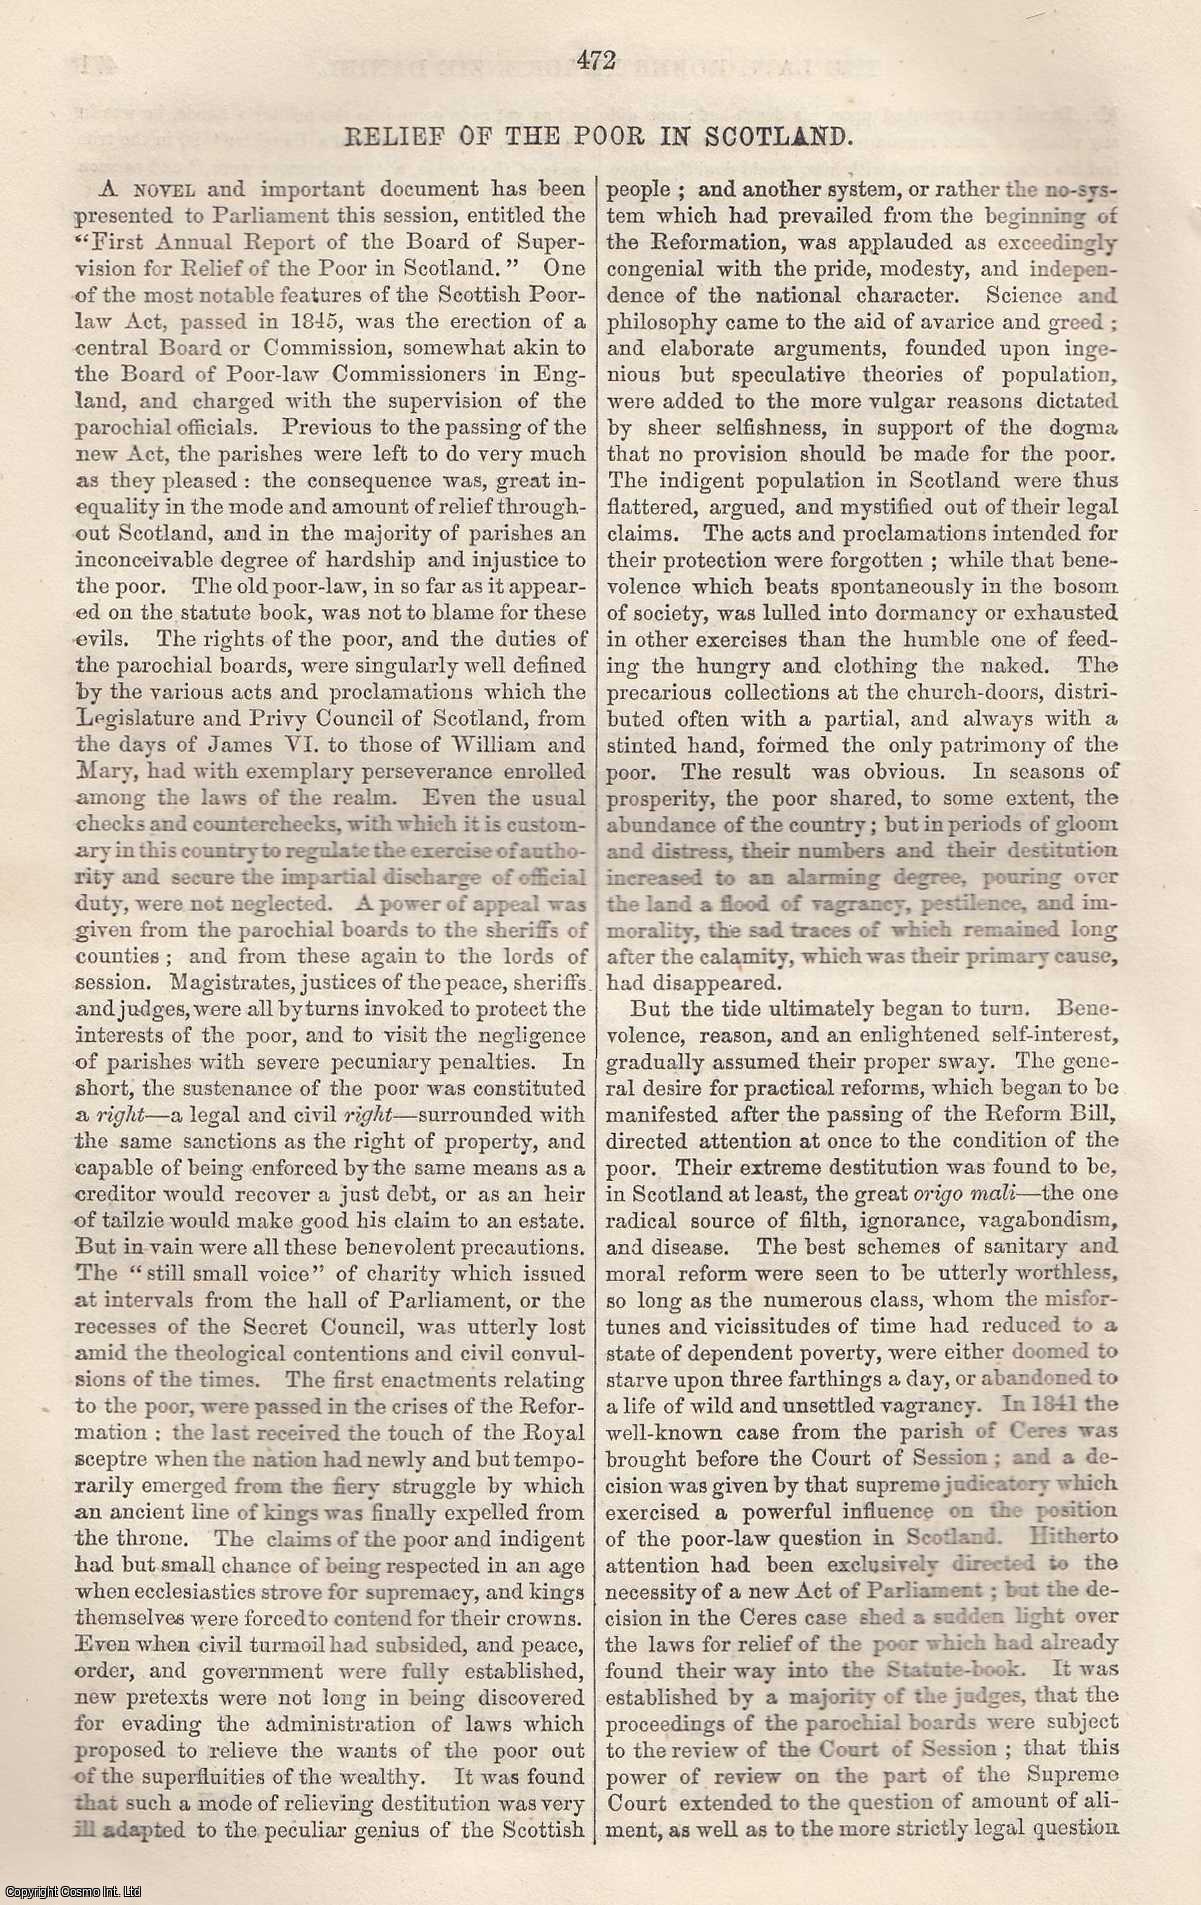 --- - Relief of The Poor in Scotland. An original article from Tait's Edinburgh Magazine, 1847.